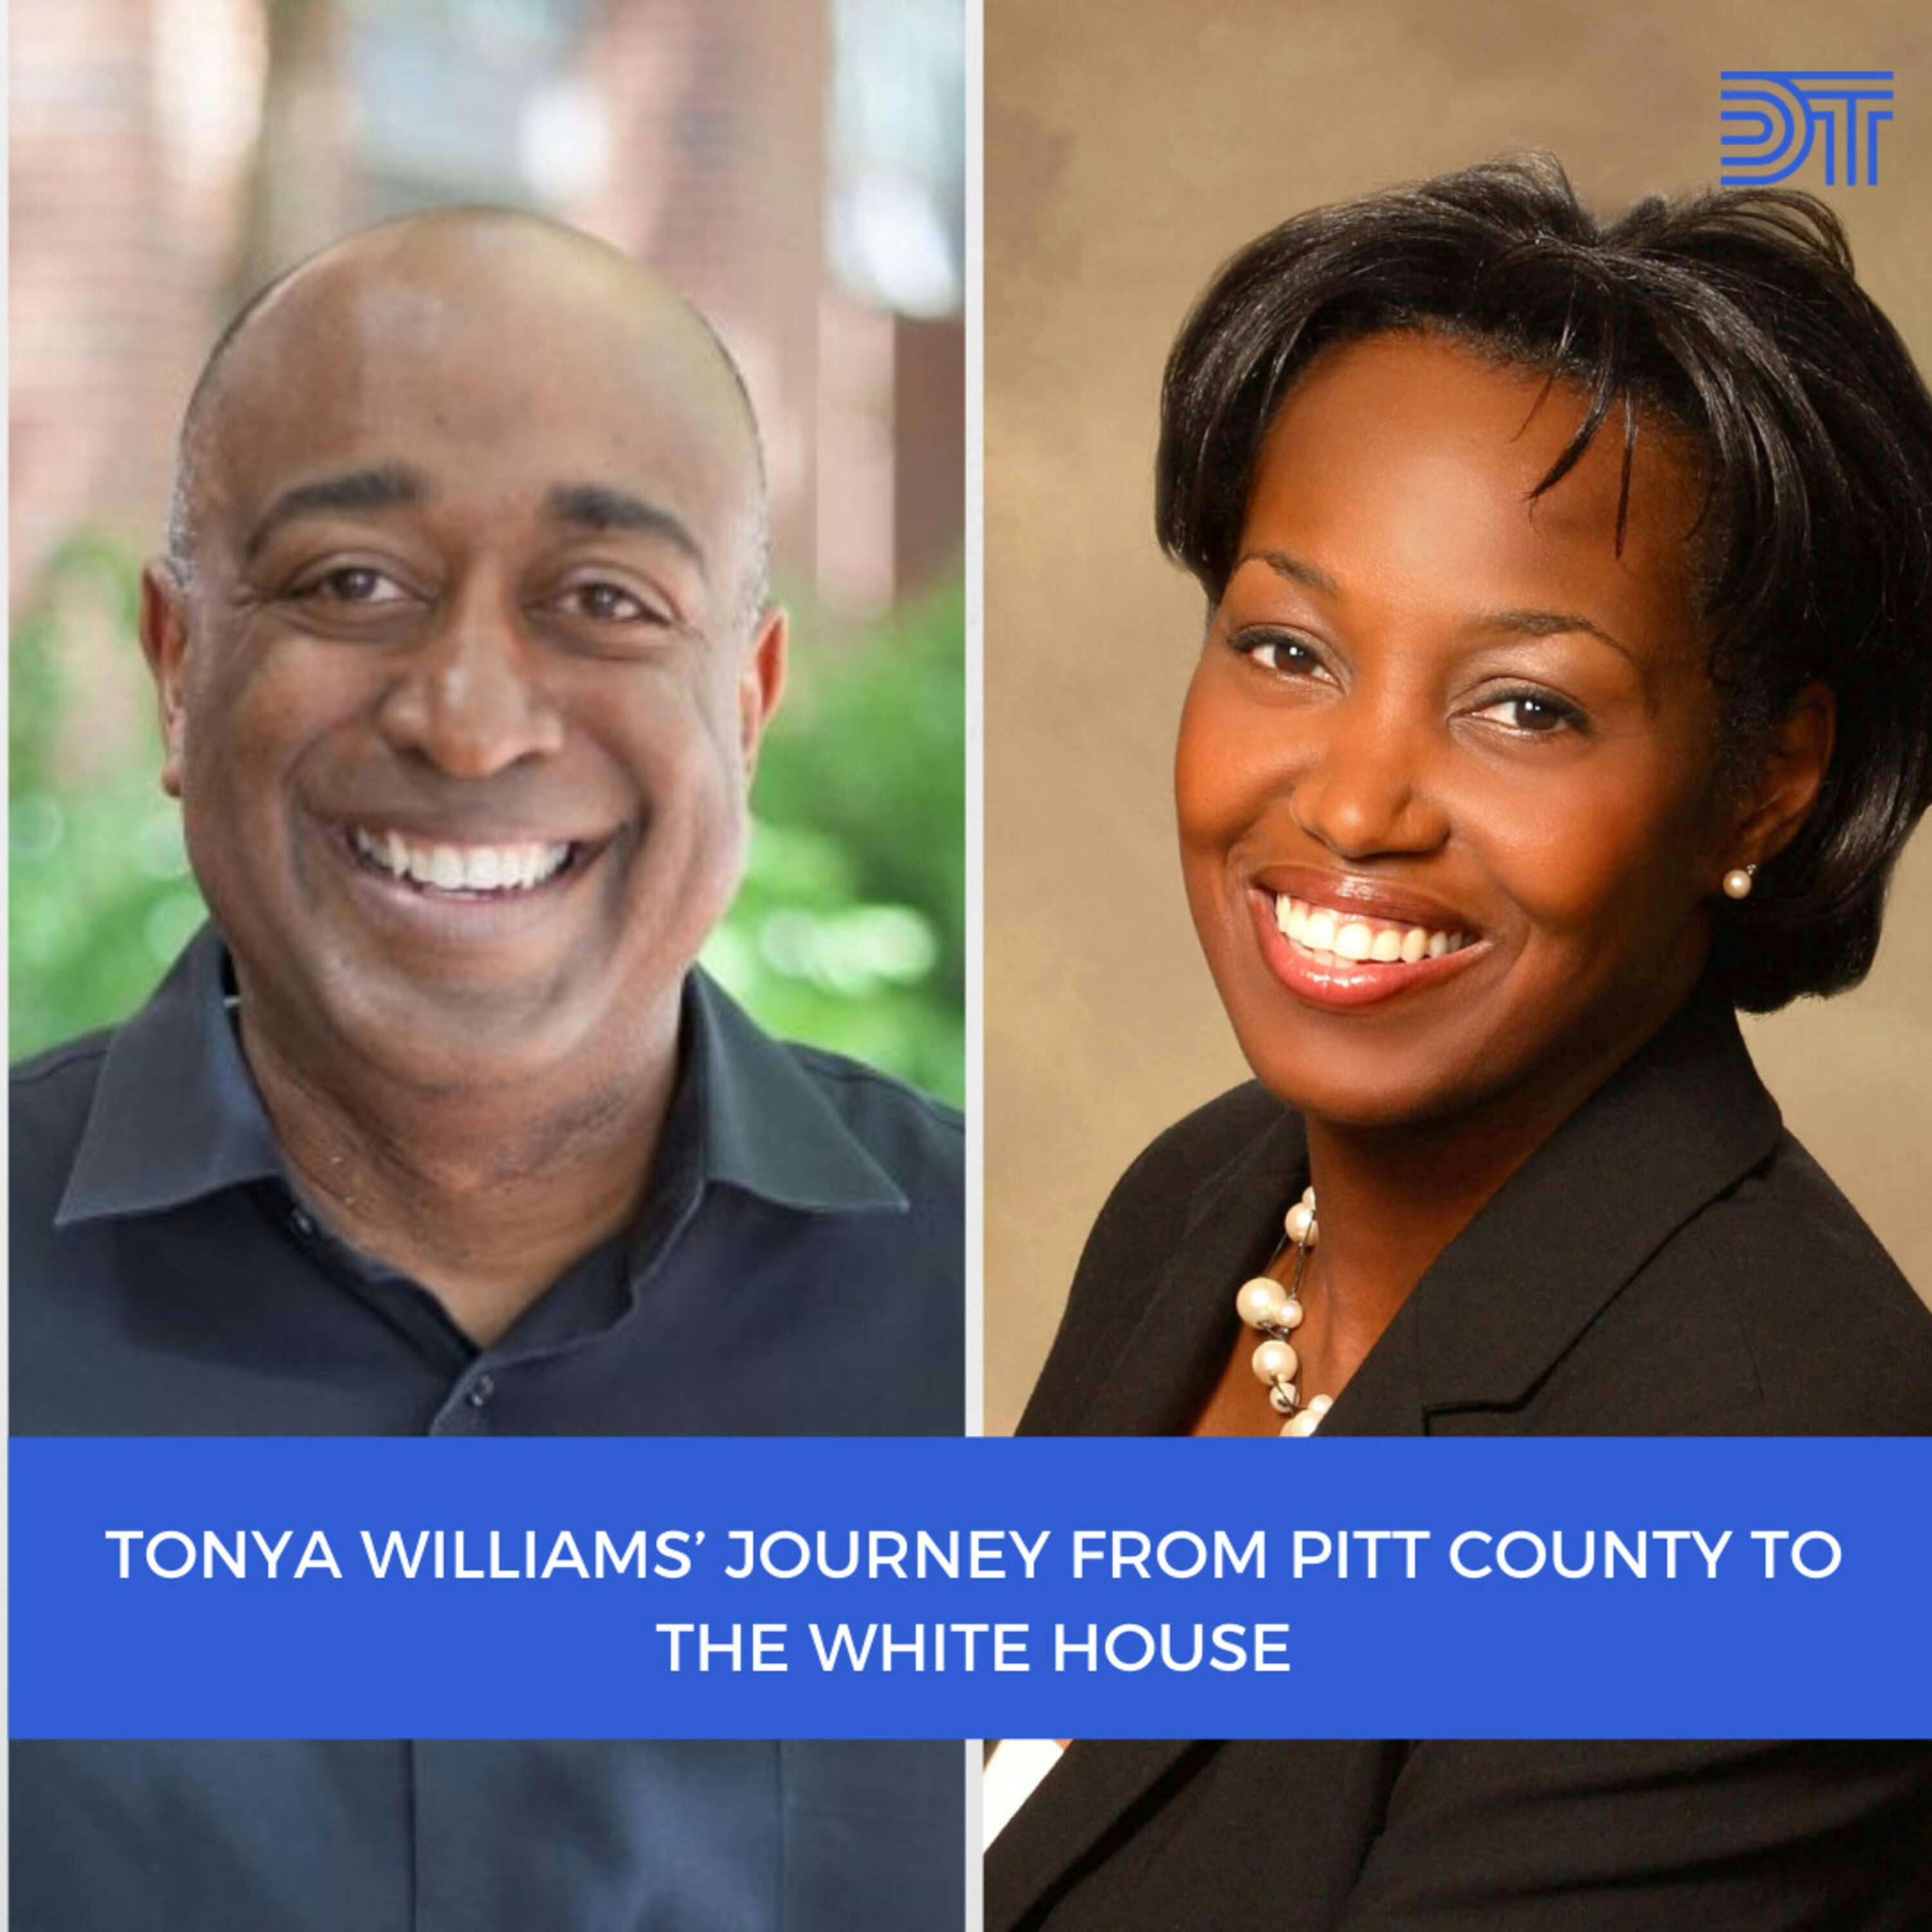 From Pitt County to The White House: Tonya Williams' Career Journey